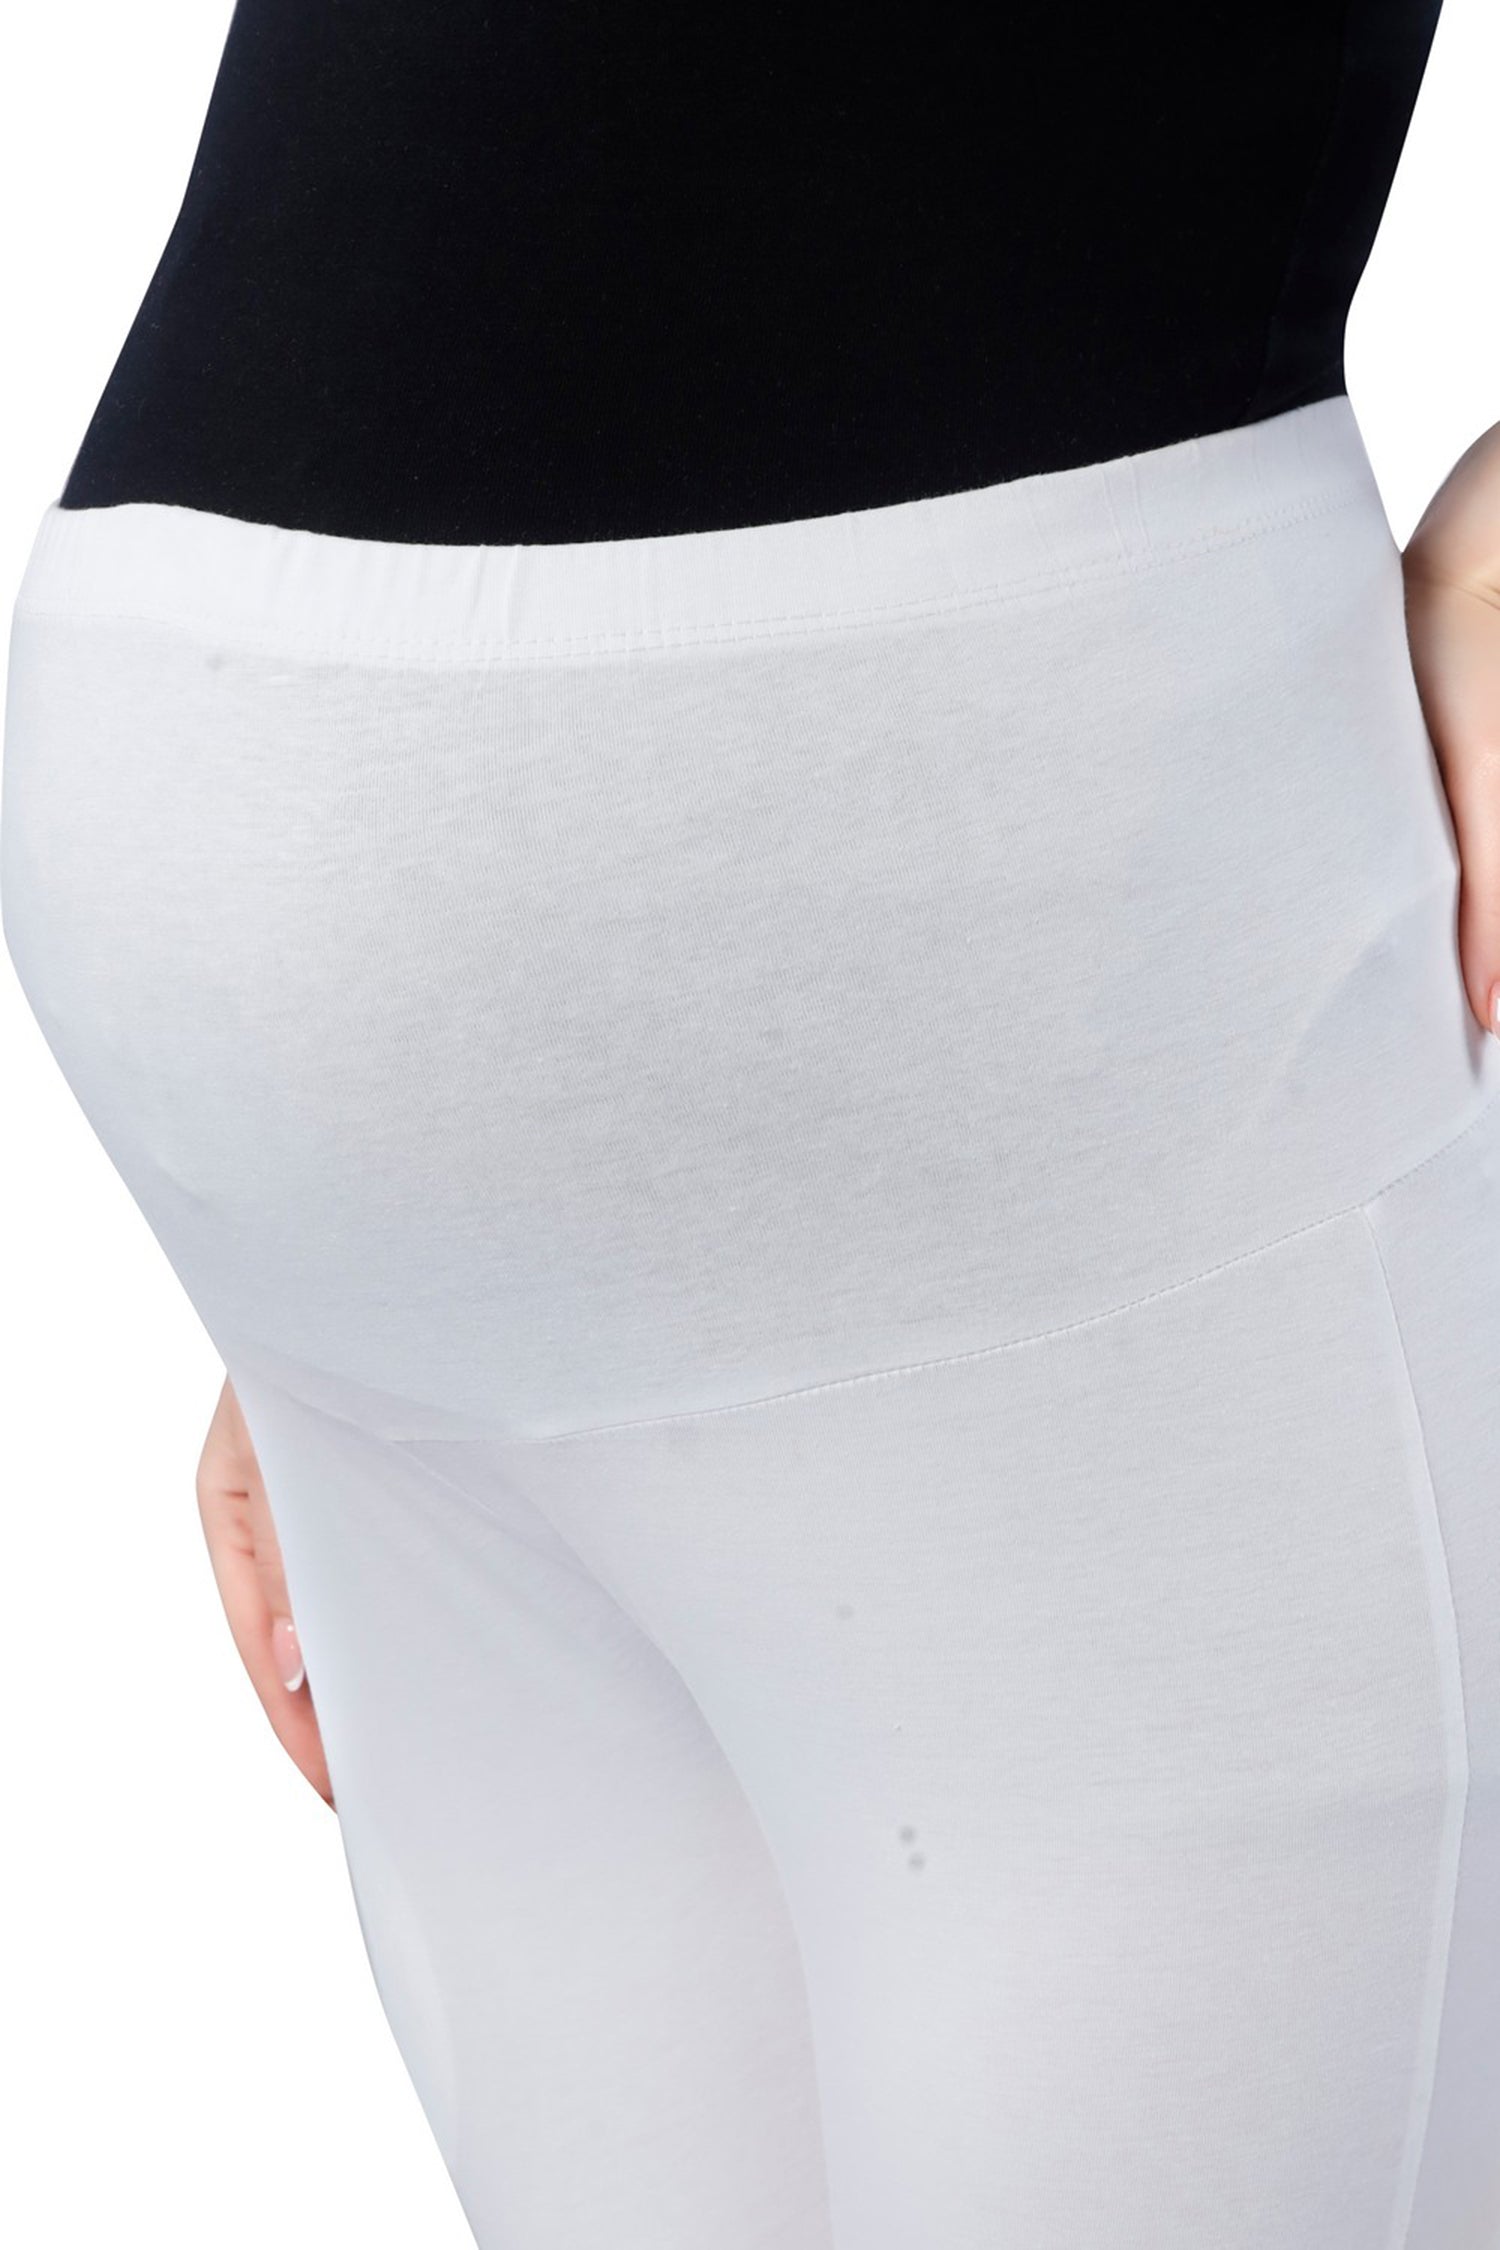 Short leggings - Isacco Bianco 97% Cotton 3% Spandex | Isacco Divise